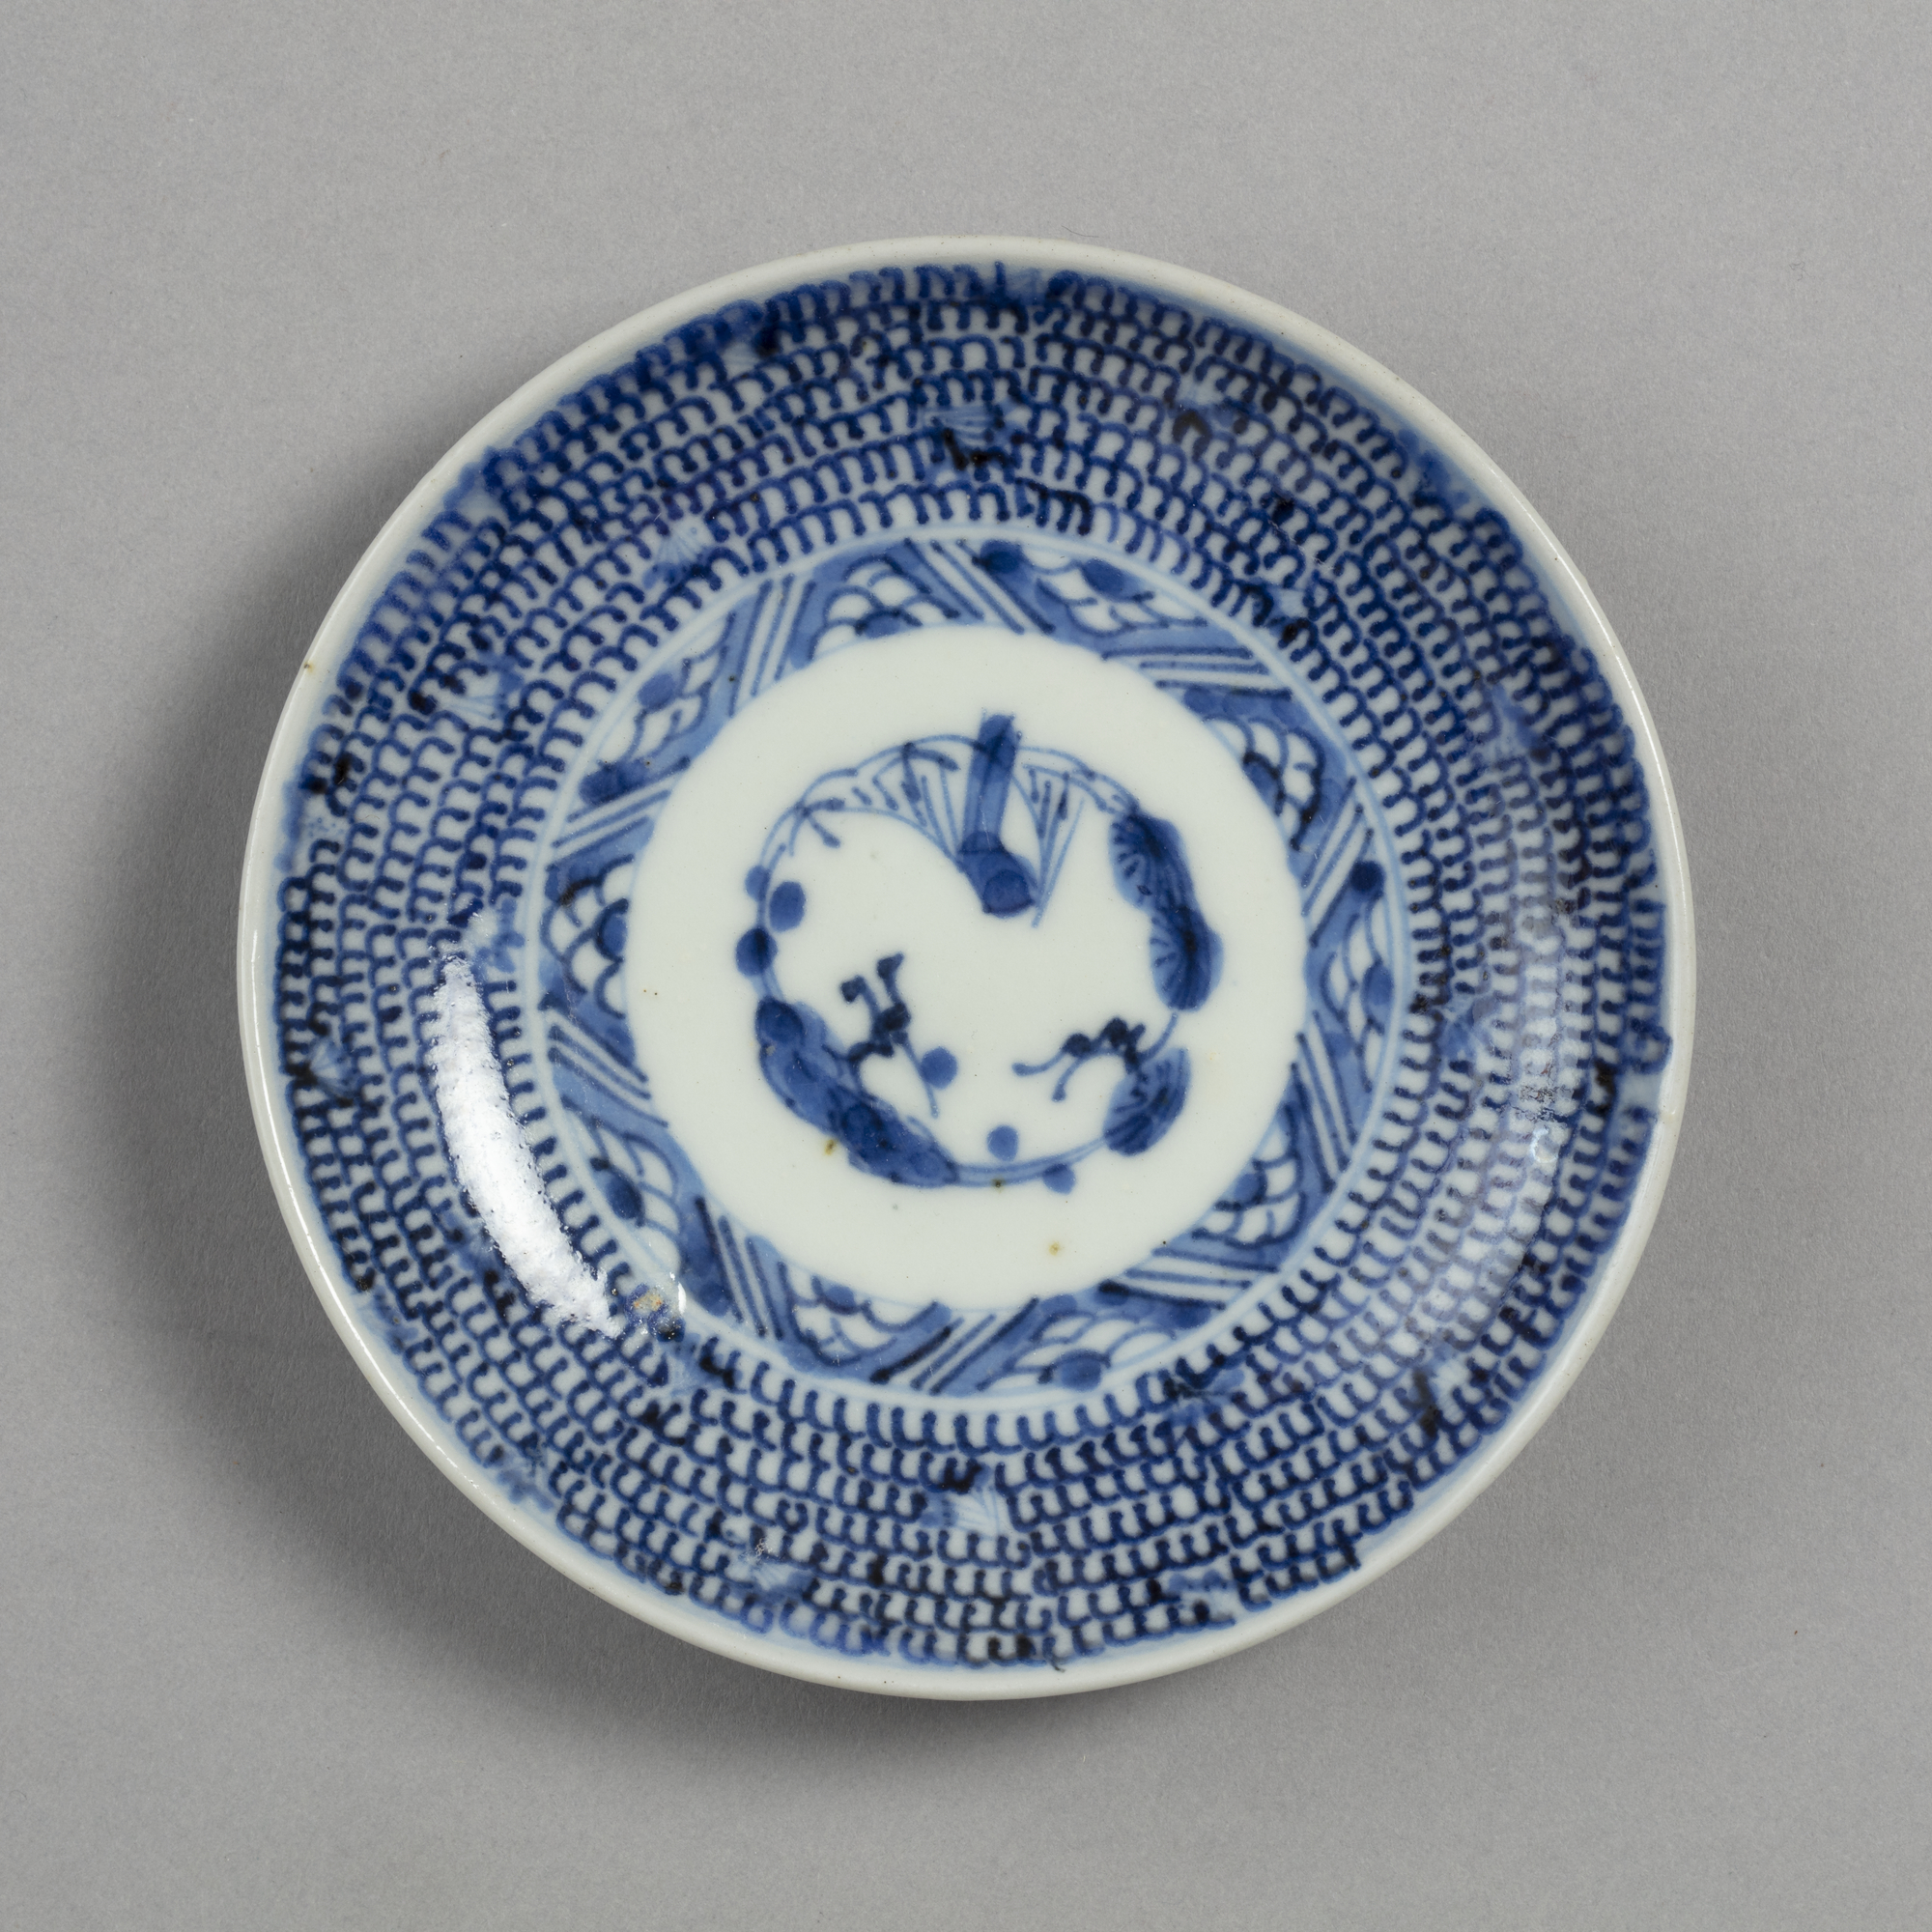 Small dish with blue on white design of plum, pine, and bamboo